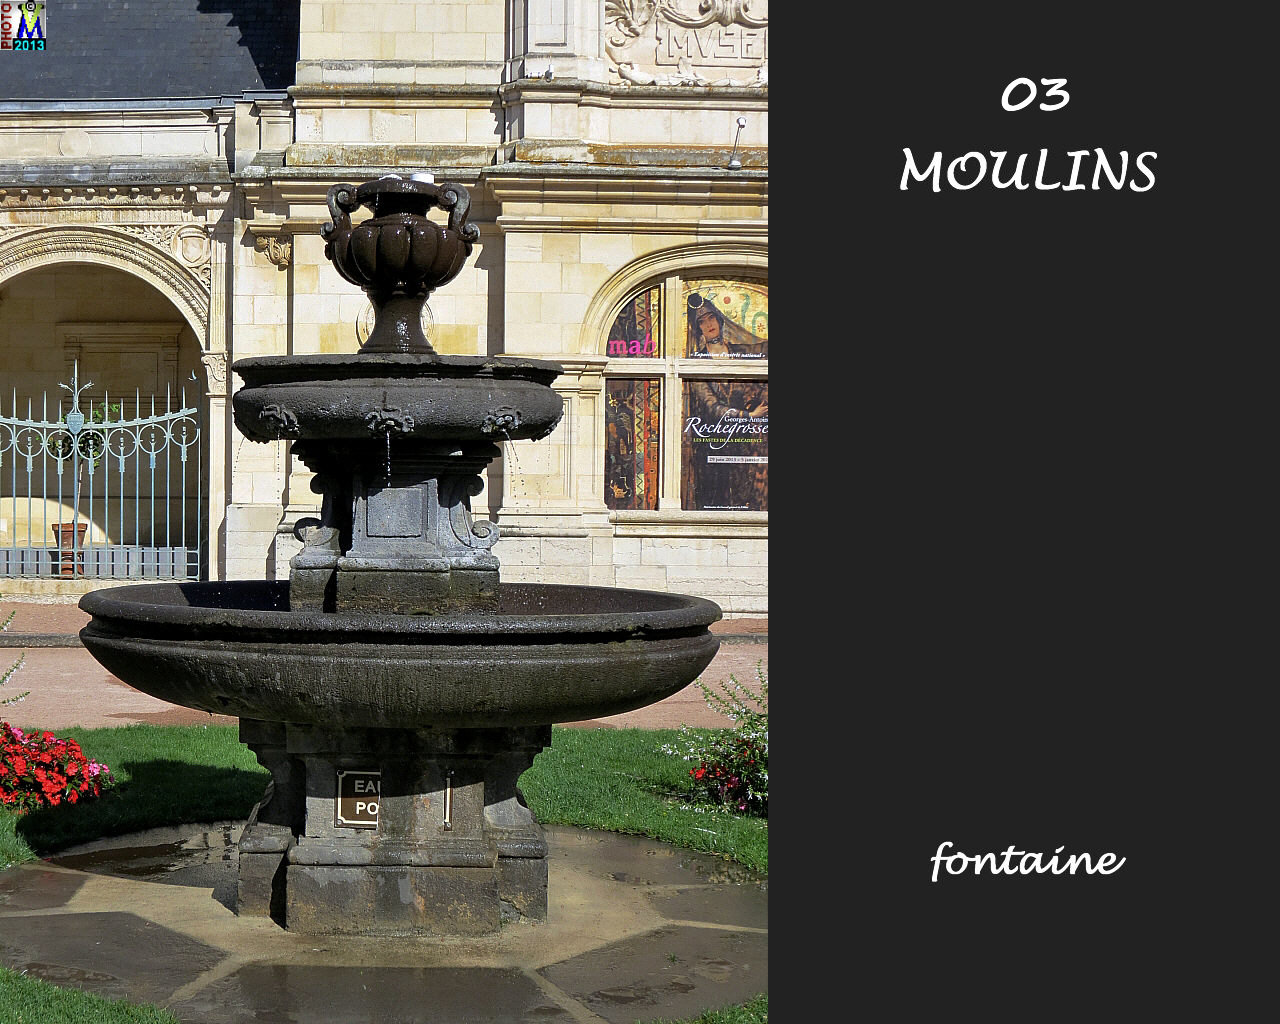 03MOULINS_fontaine_110.jpg